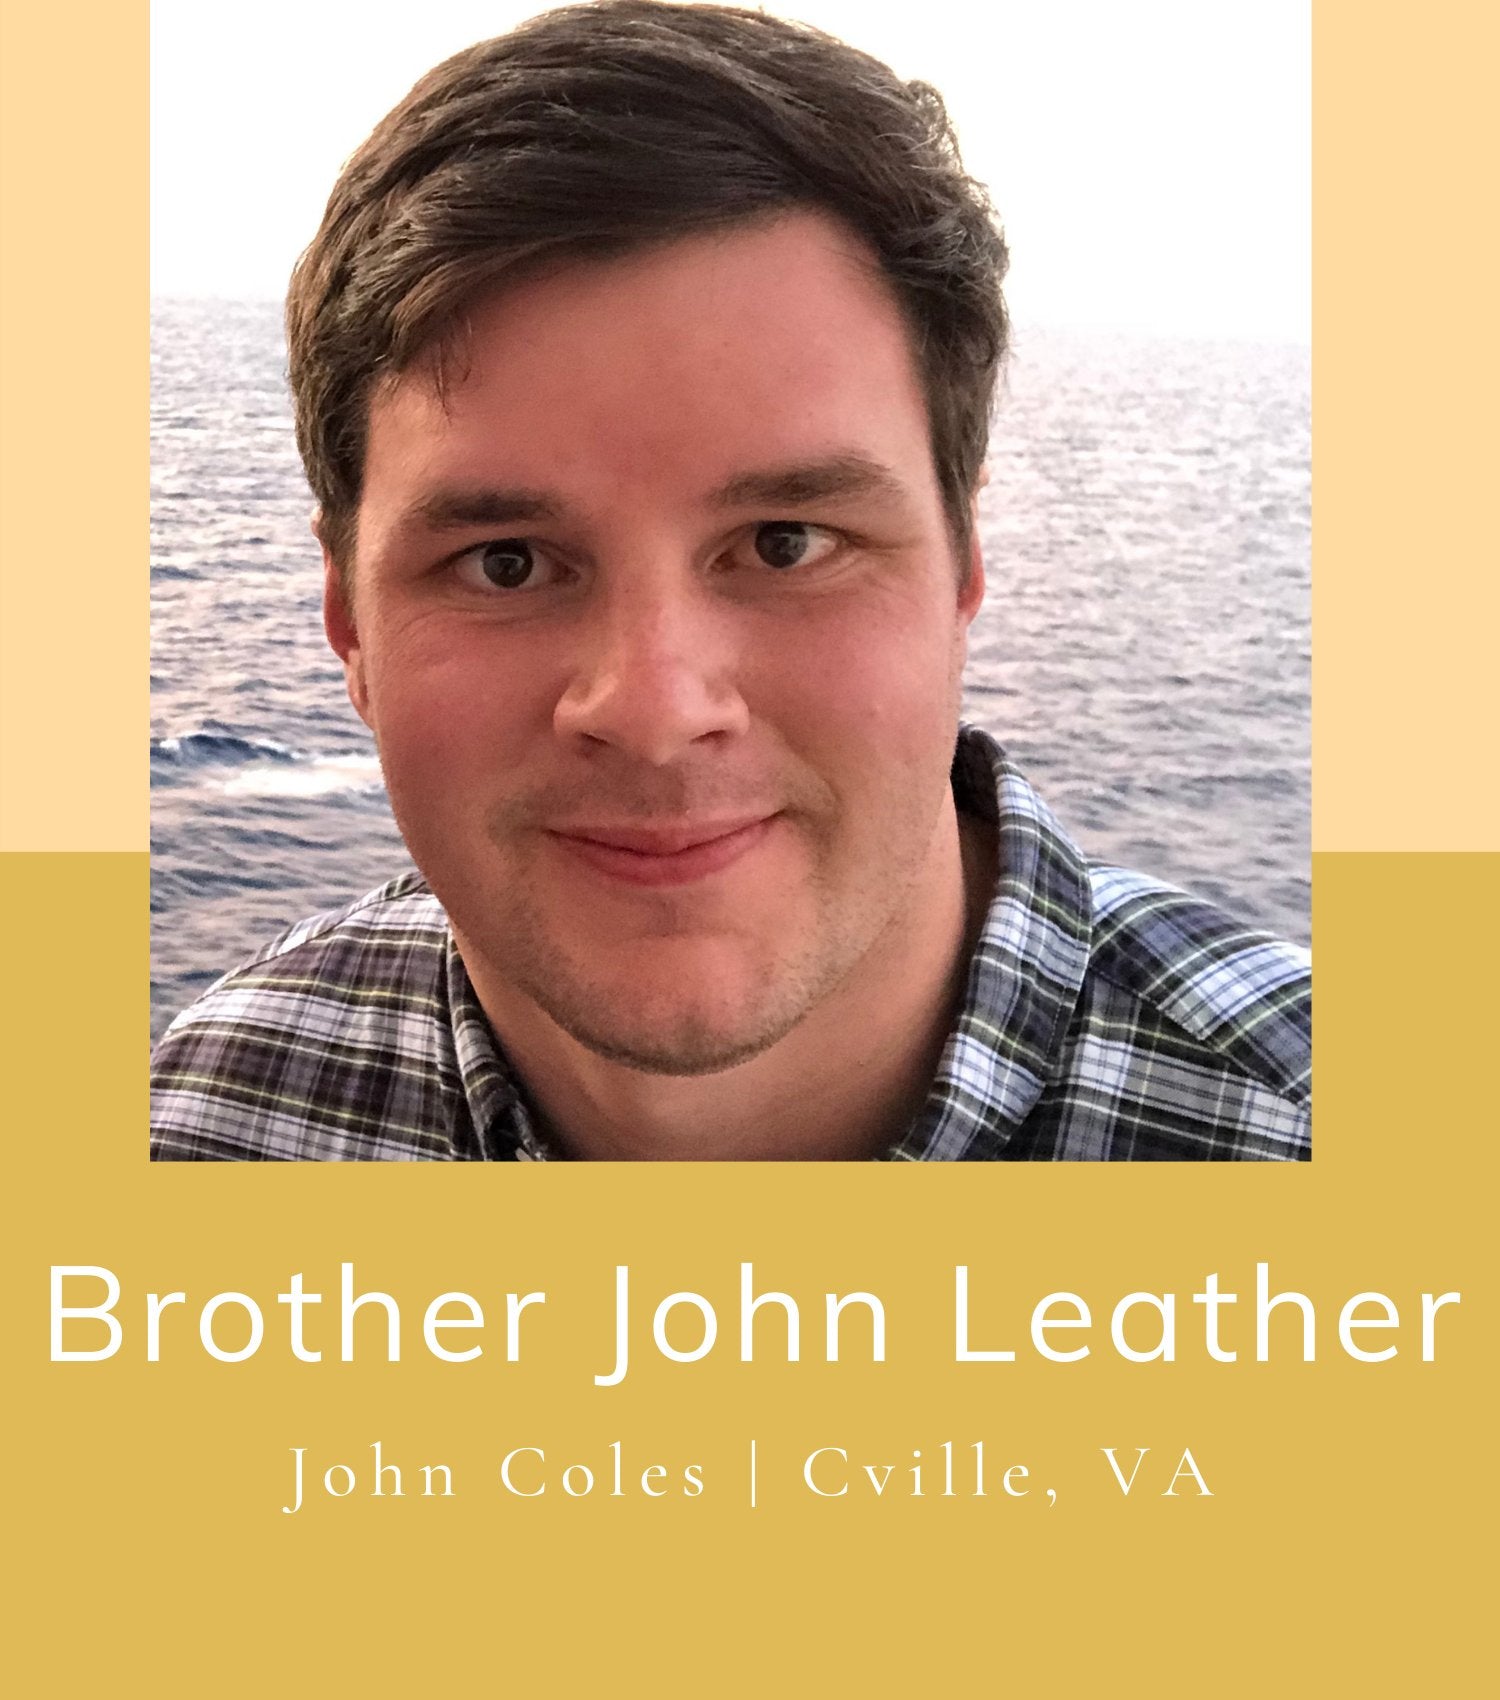 BROTHER JOHN LEATHER